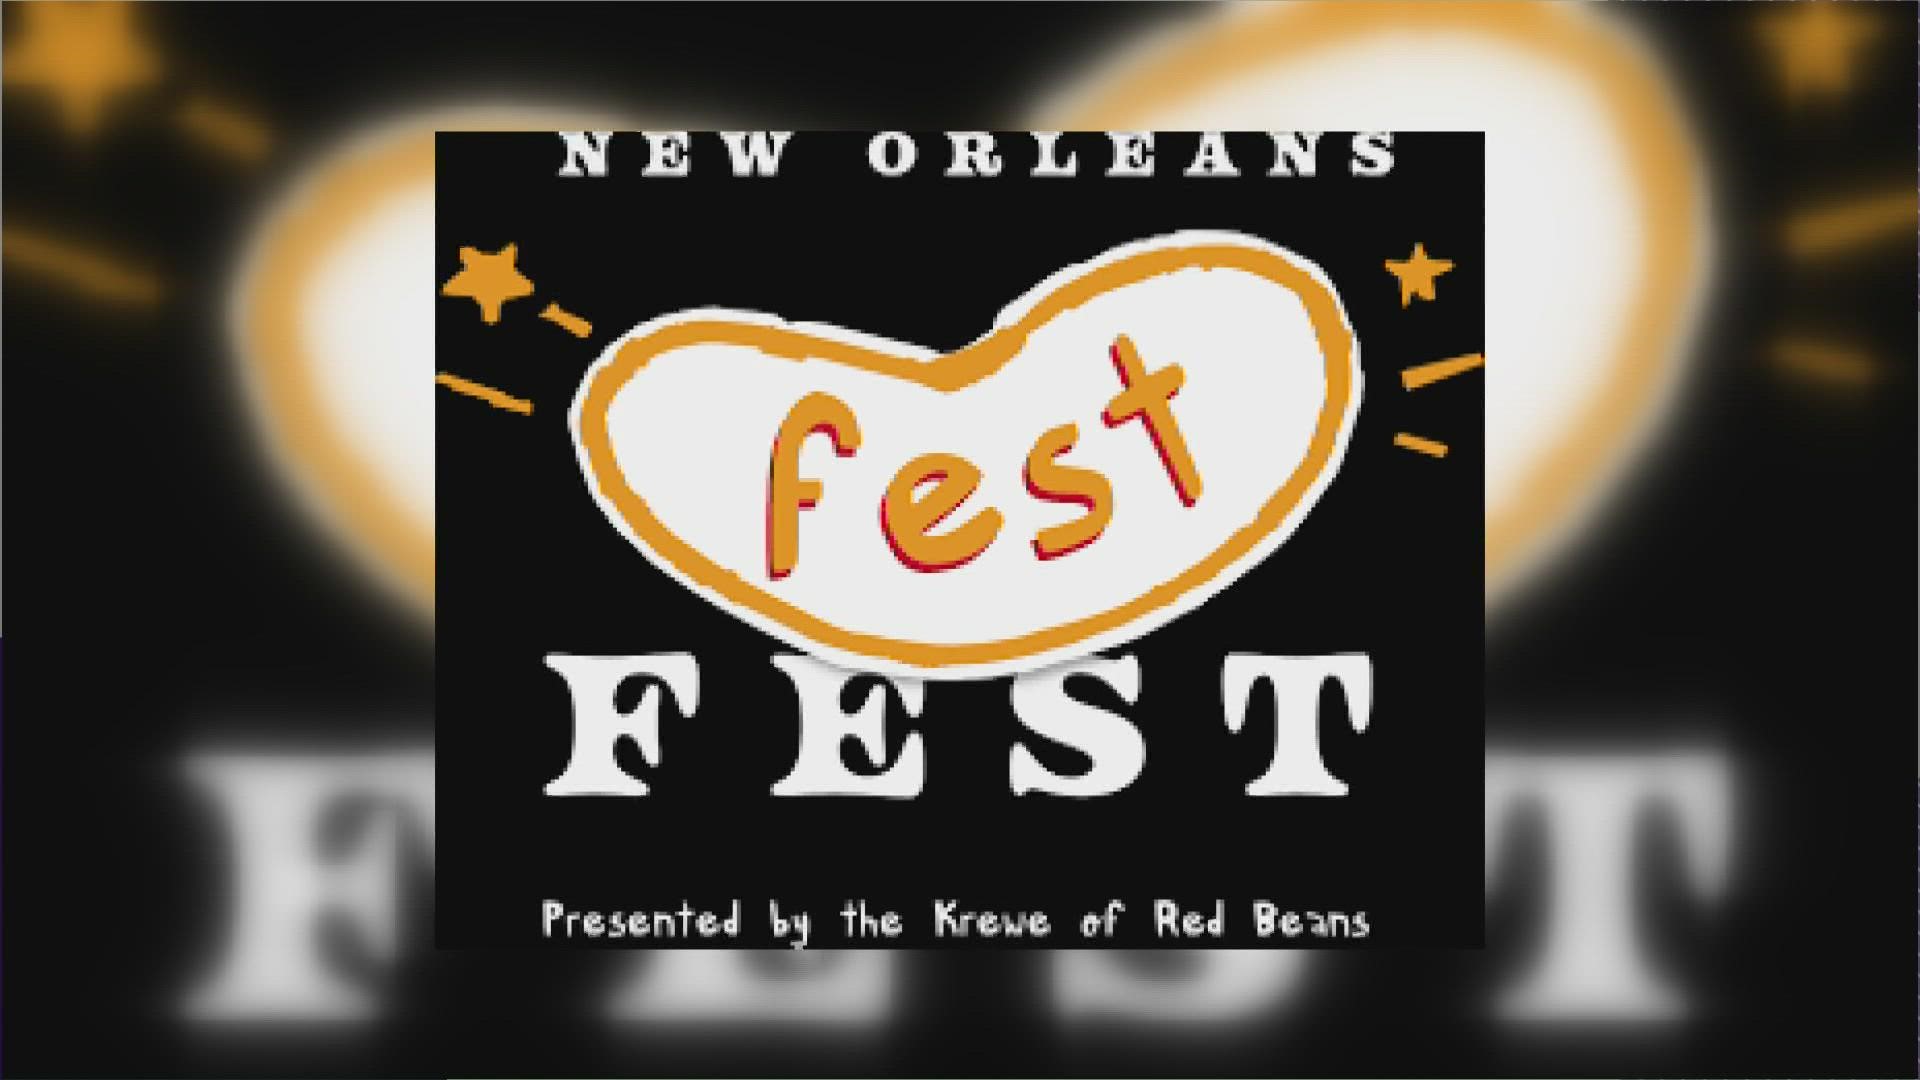 The Krewe of Red Beans latest pandemic initiative helps musicians get back the money they lost when New Orleans festivals were cancelled.